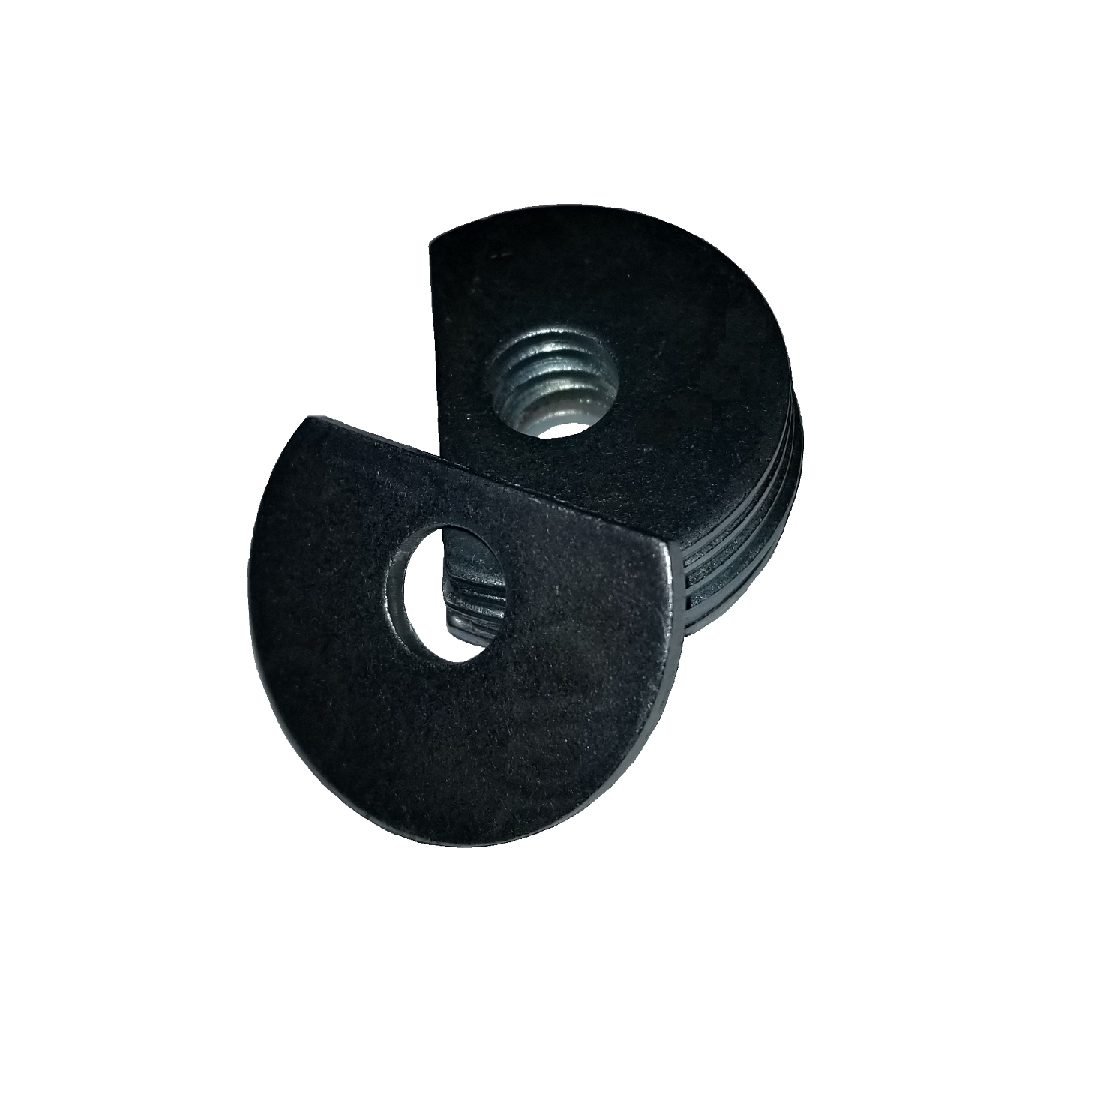 Clipped OD Washer - 0.562 ID, 1.250 OD, 0.074 Thick, Low Carbon Steel - Soft, Galvanized